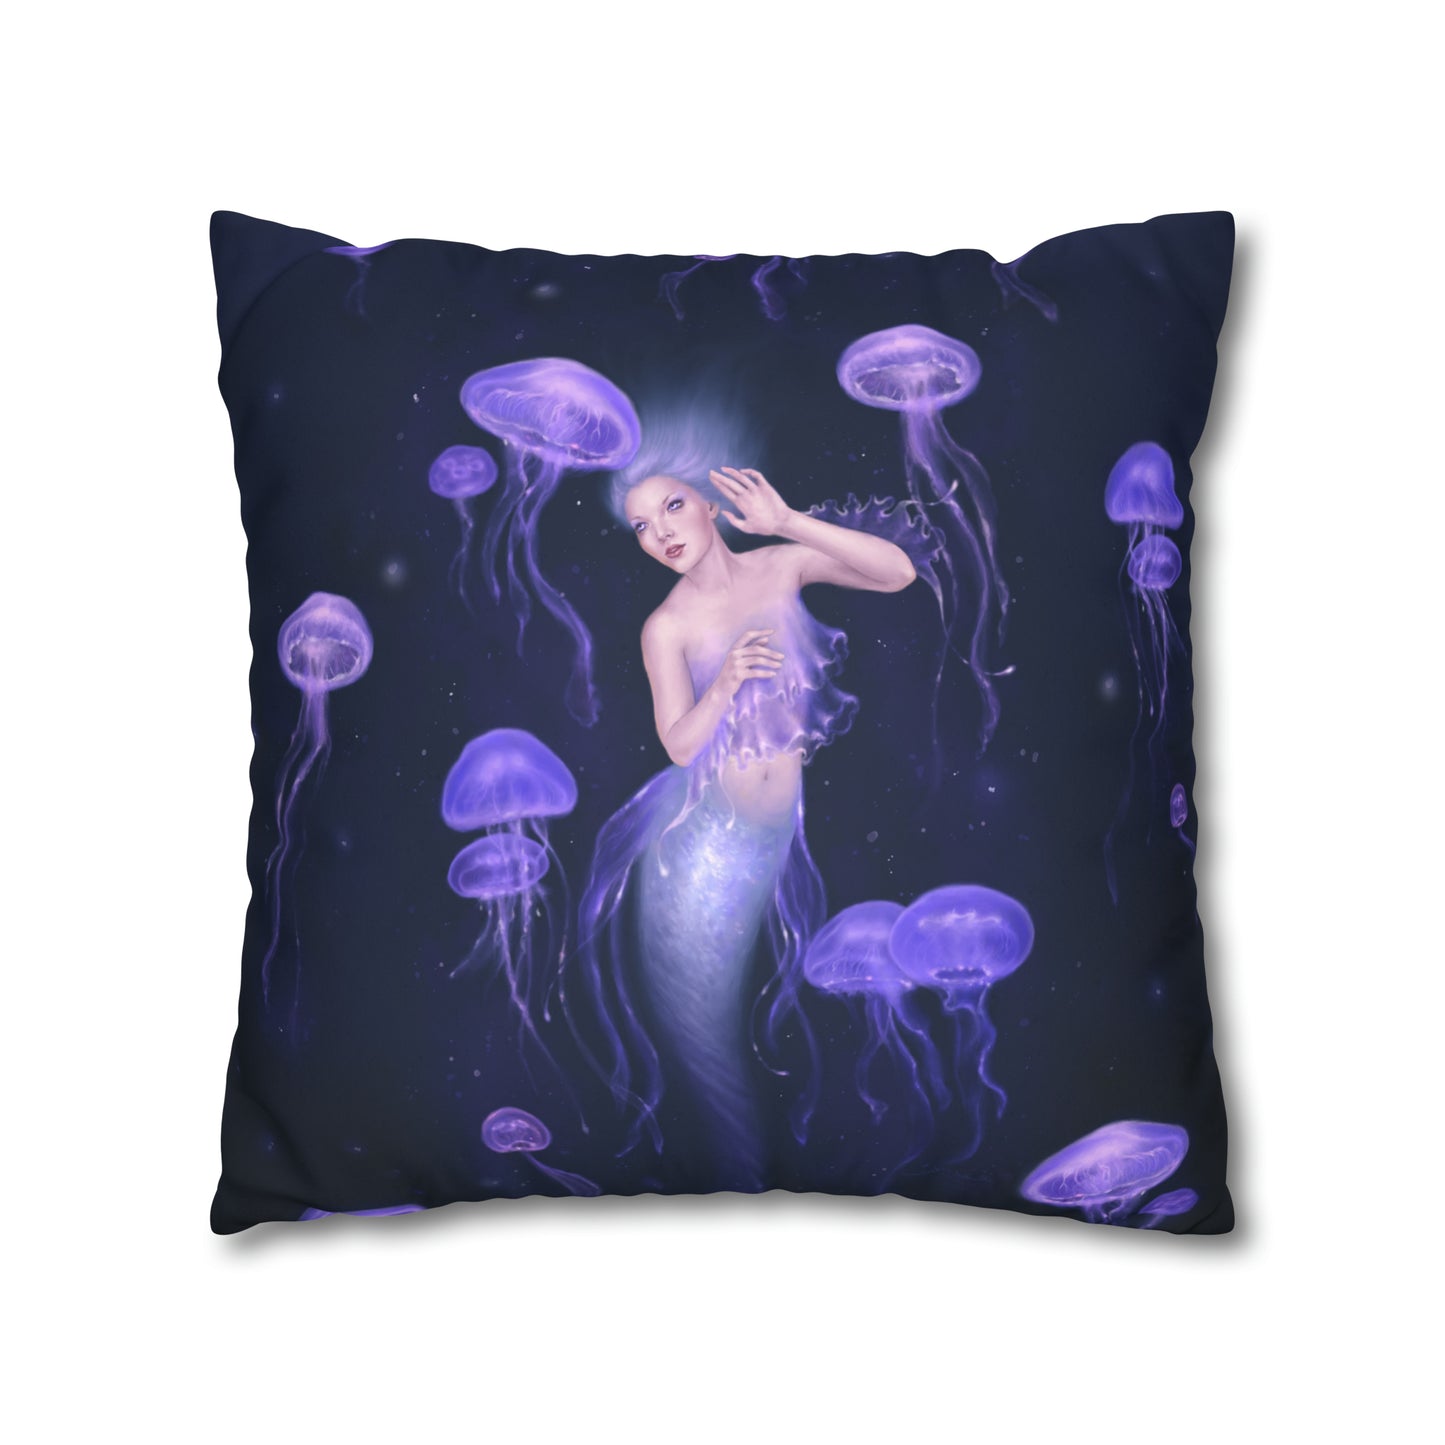 Throw Pillow Cover - Bioluminescence